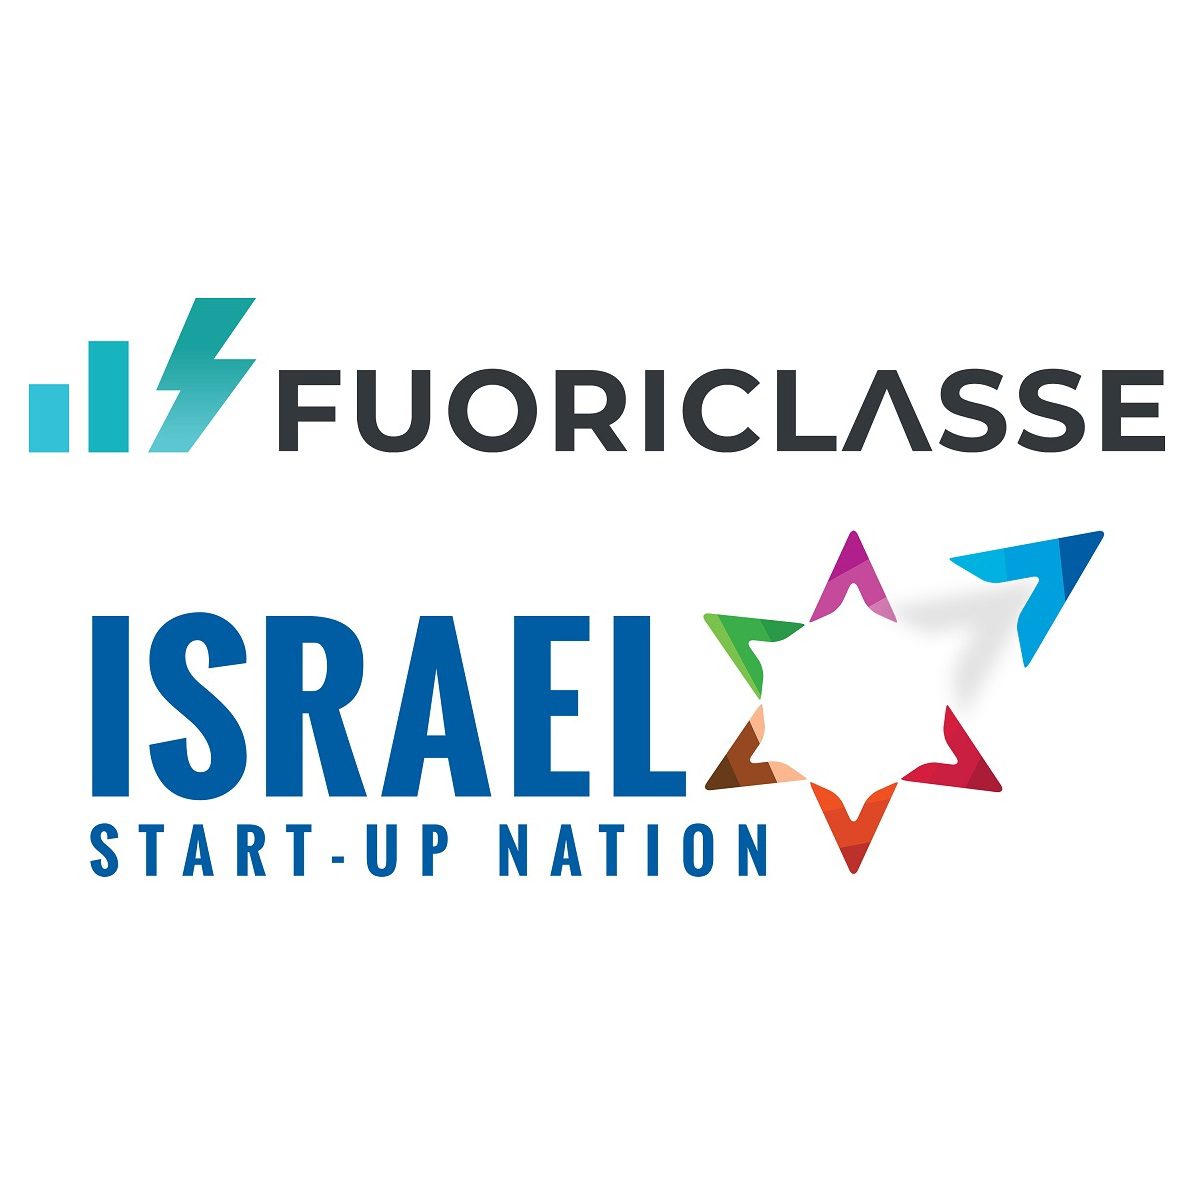 Israel Start-Up Nation joins forces with Fuoriclasse